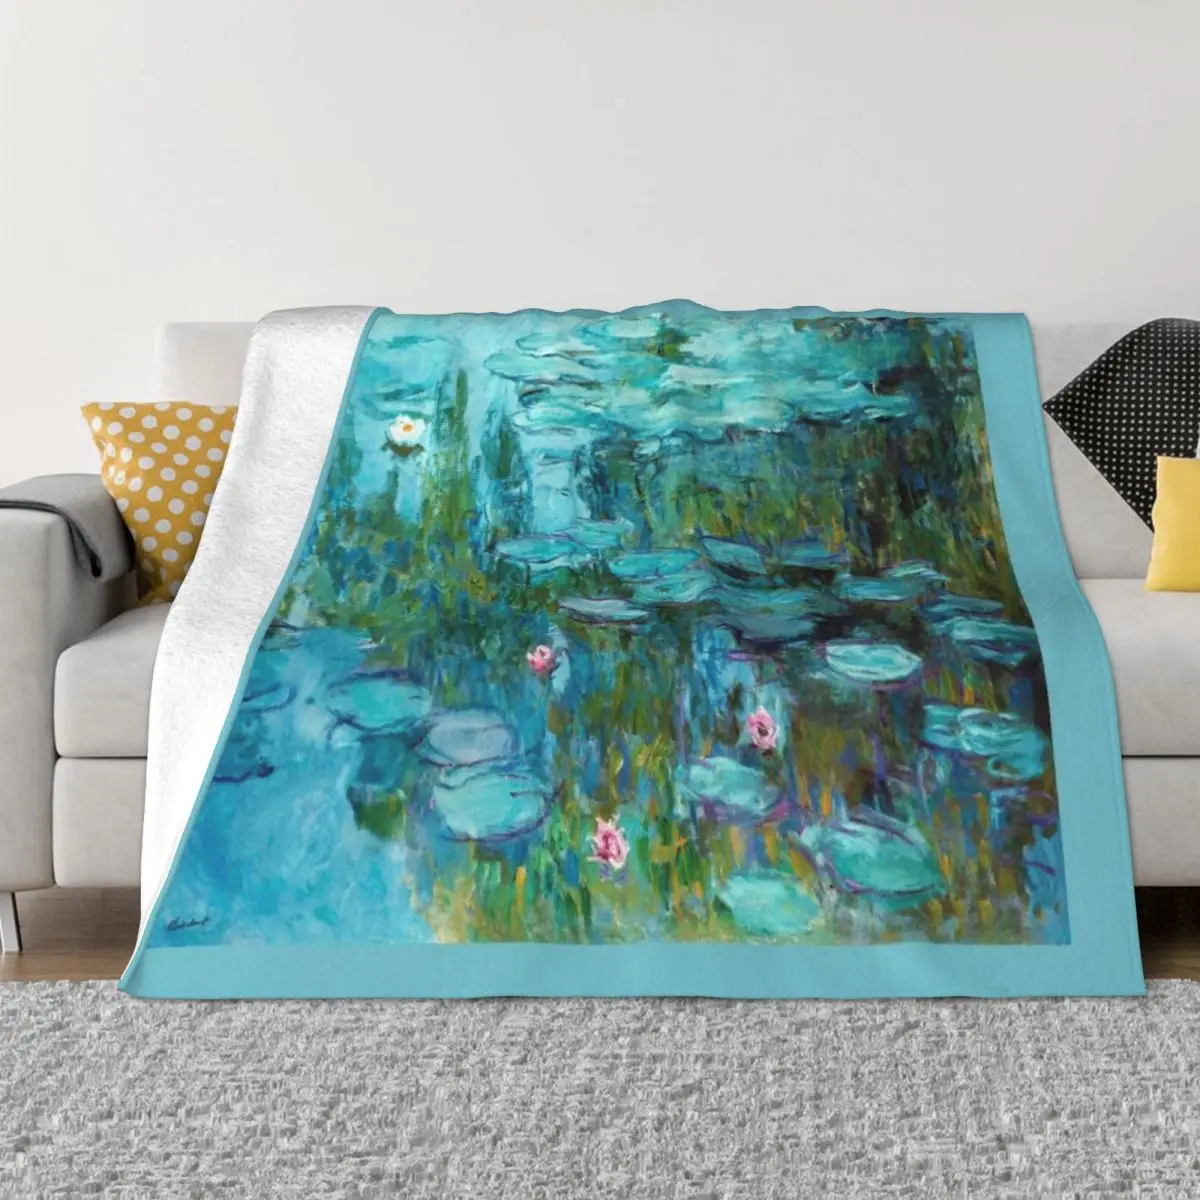 

Claude Monet - Water Lilies - Nympheas Throw Blanket Fluffy Soft Blankets Cute Blanket Soft Blanket Blankets Sofas Of Decoration